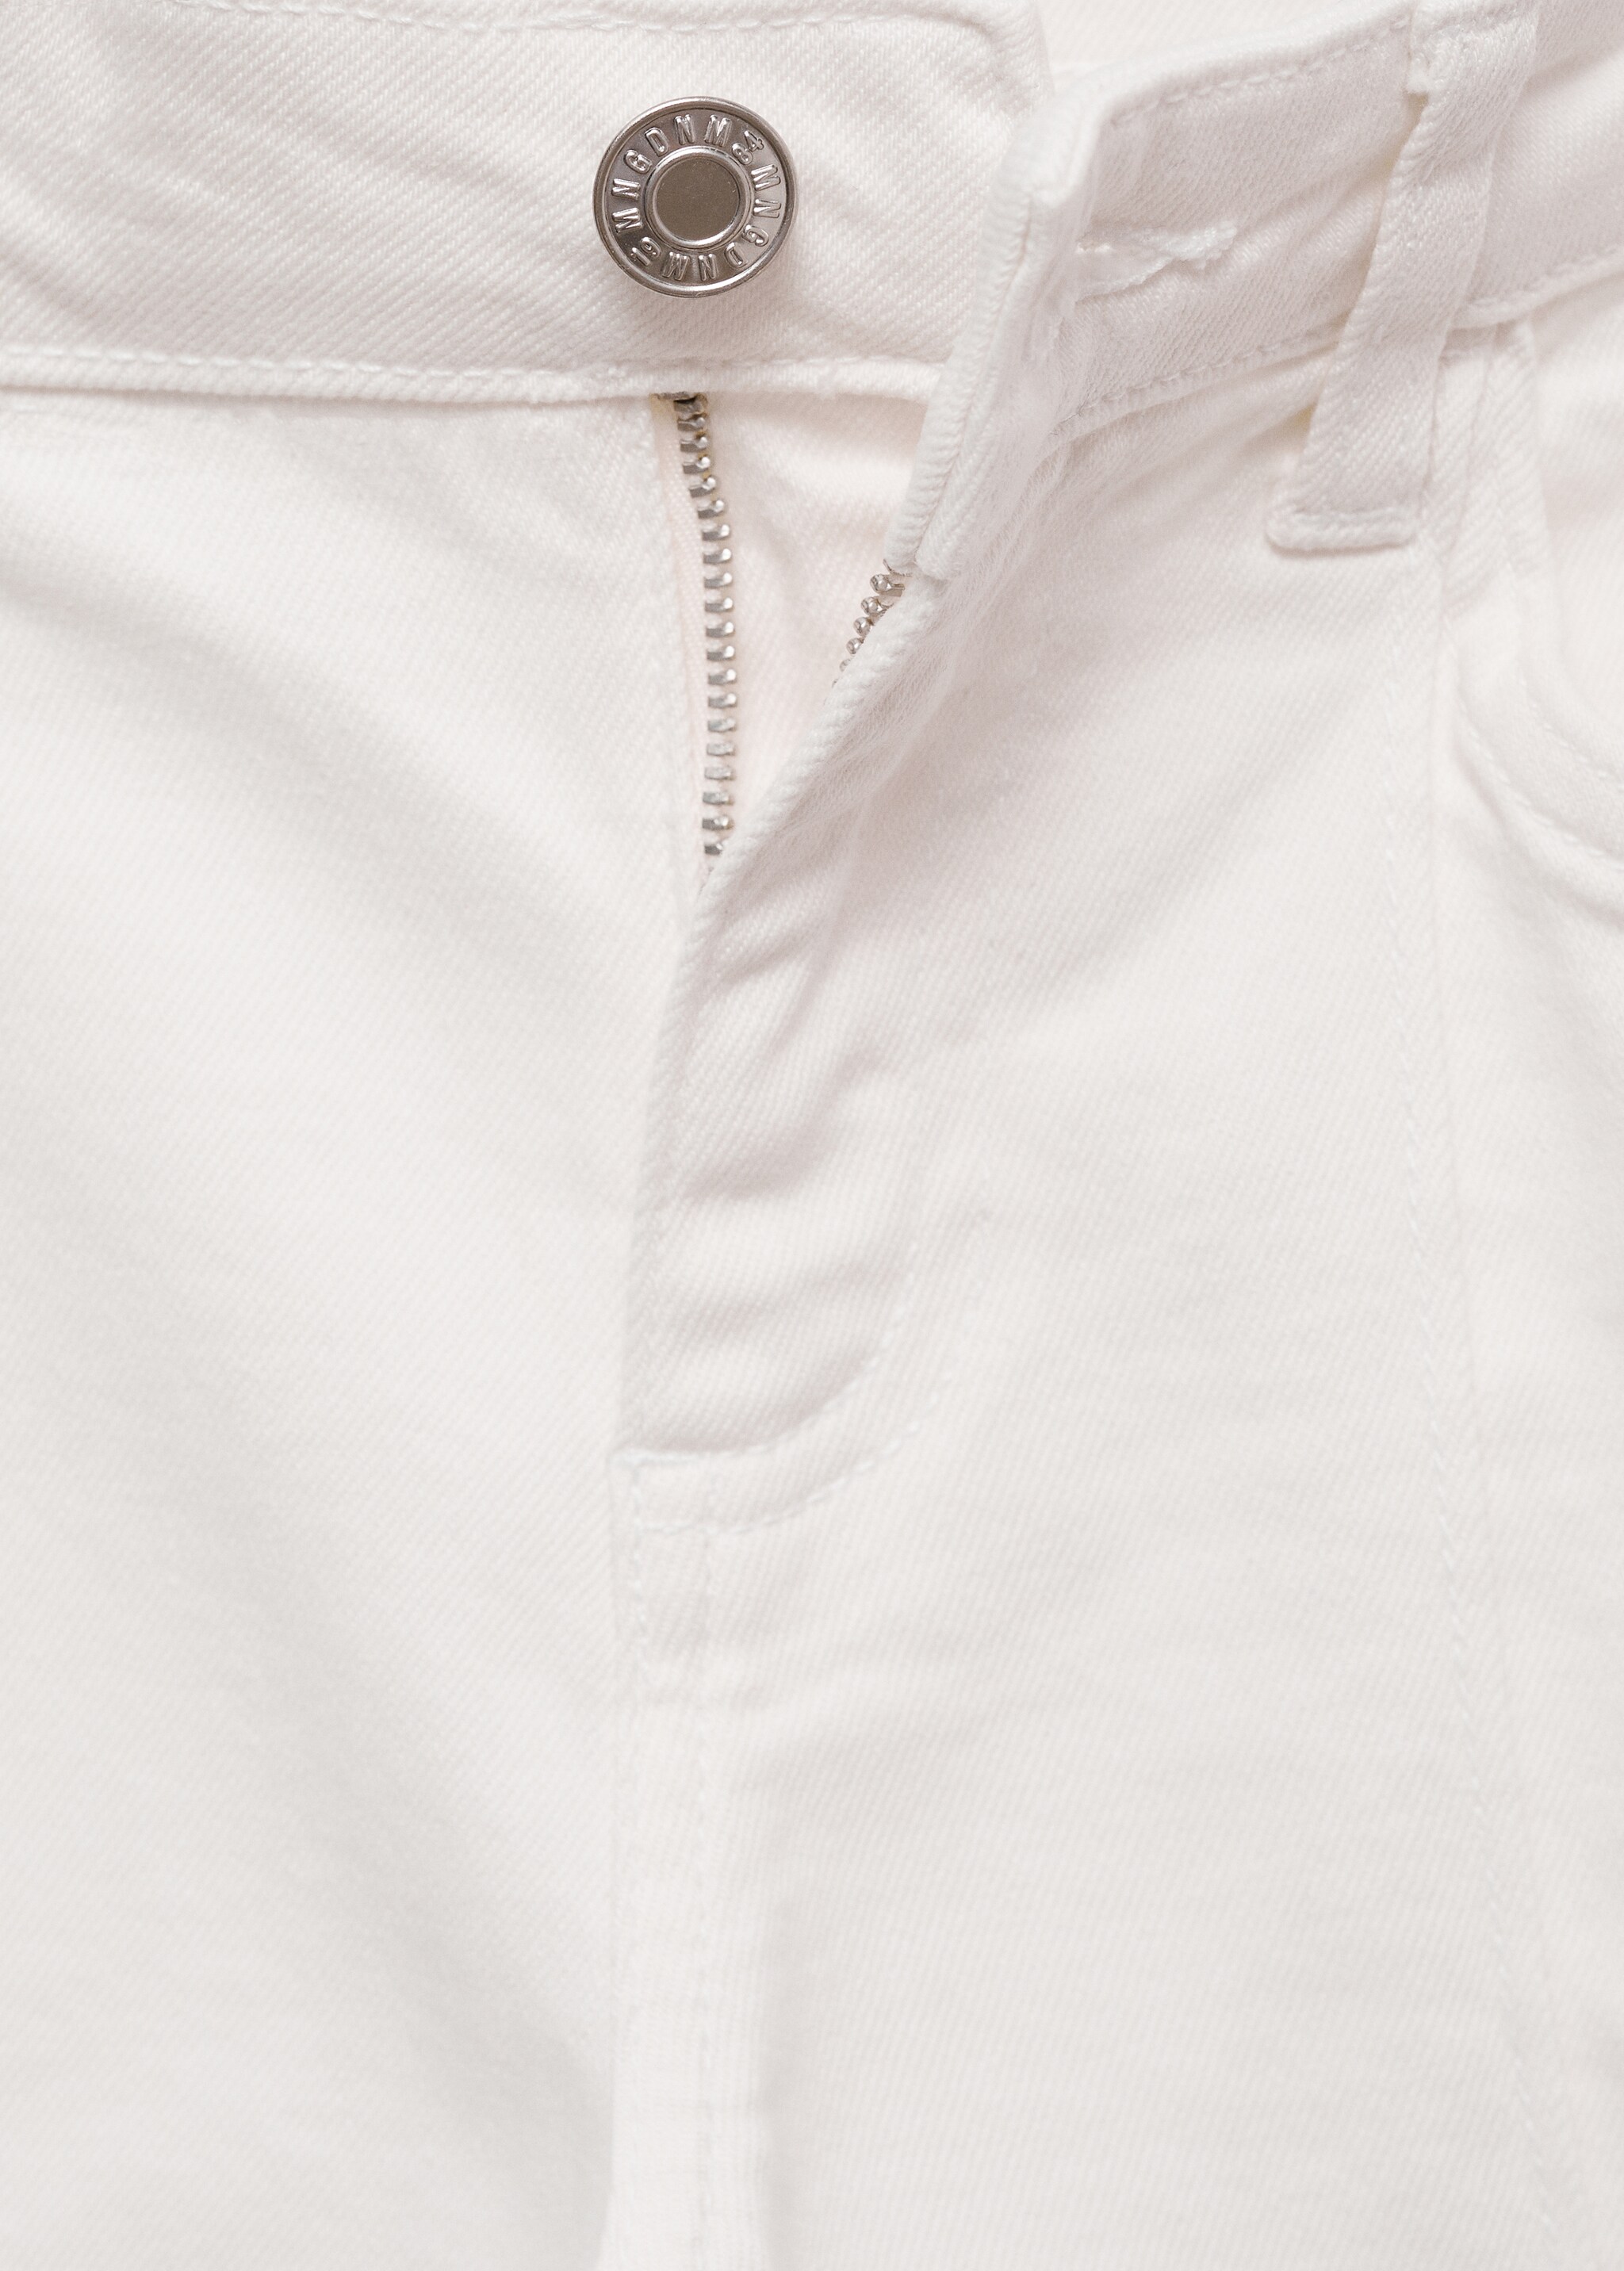 Slim capri jeans with decorative stitching - Details of the article 8